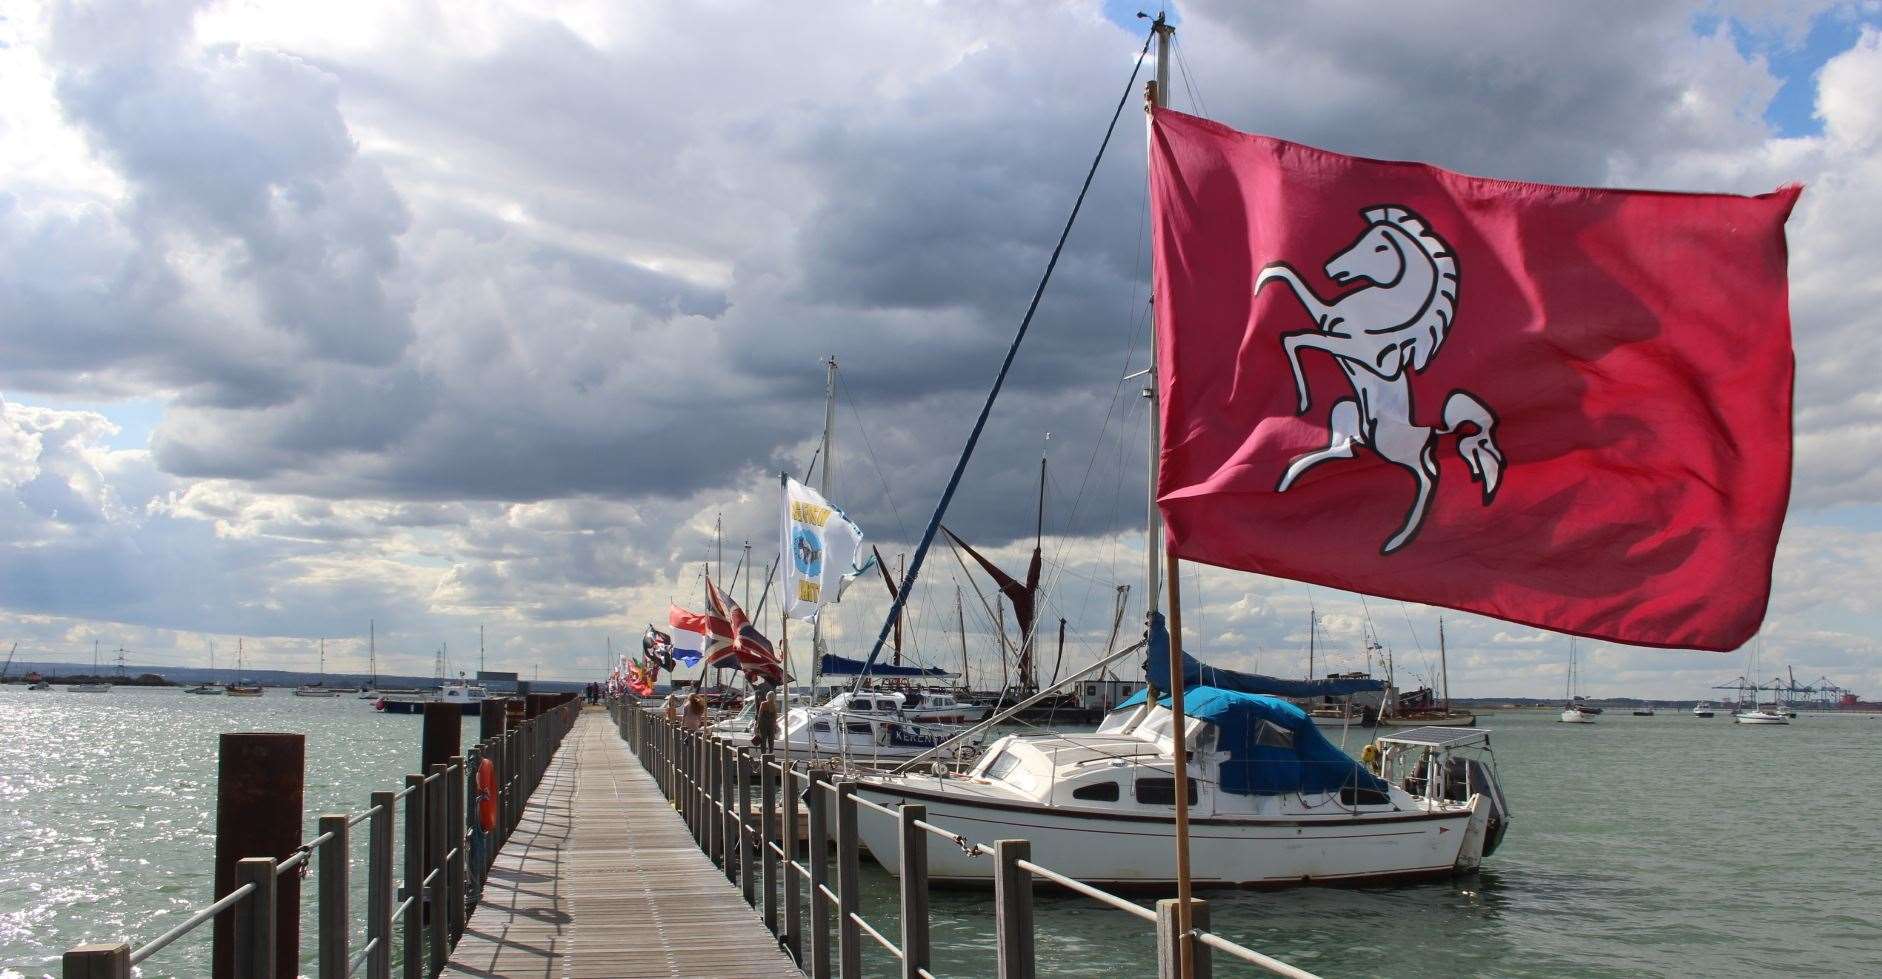 The Invicta Kent flag flying on the all-tide landing stage at Queenborough, as part of the classic boat festival